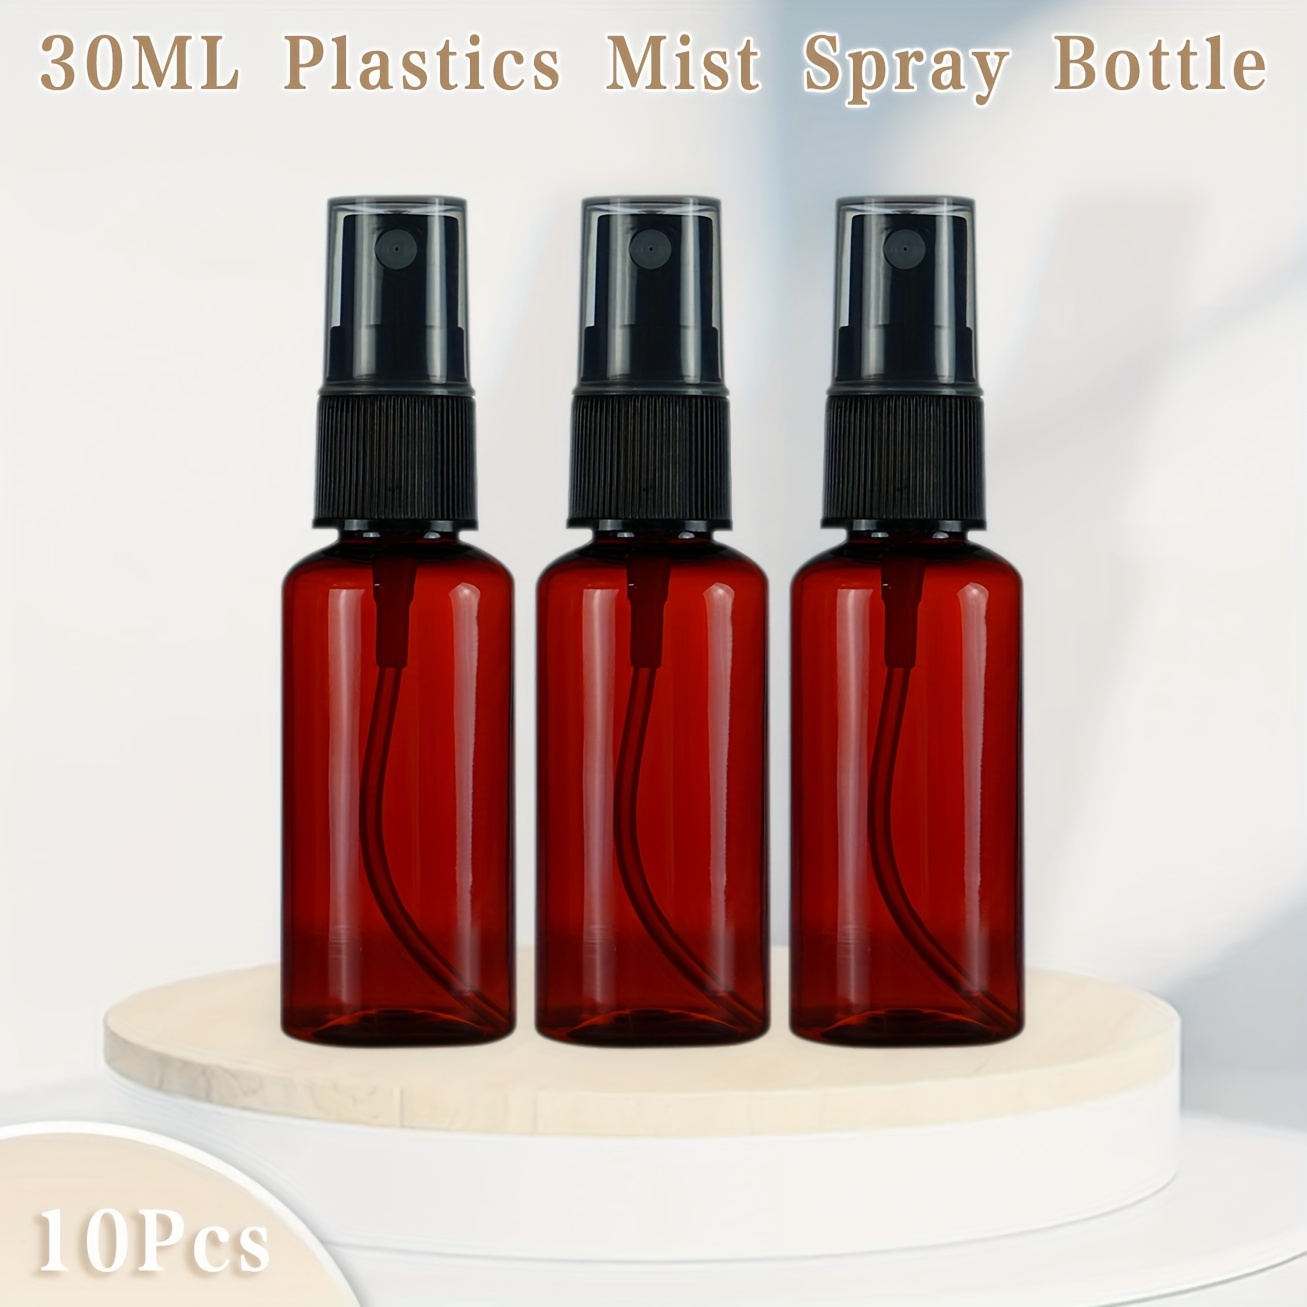 2pack 16oz Glass Spray Bottle With Protective Silicone Sleeve Refillable  Bathroom Spray for Essential Oils, Kitchen Cleaner Amber/clear 